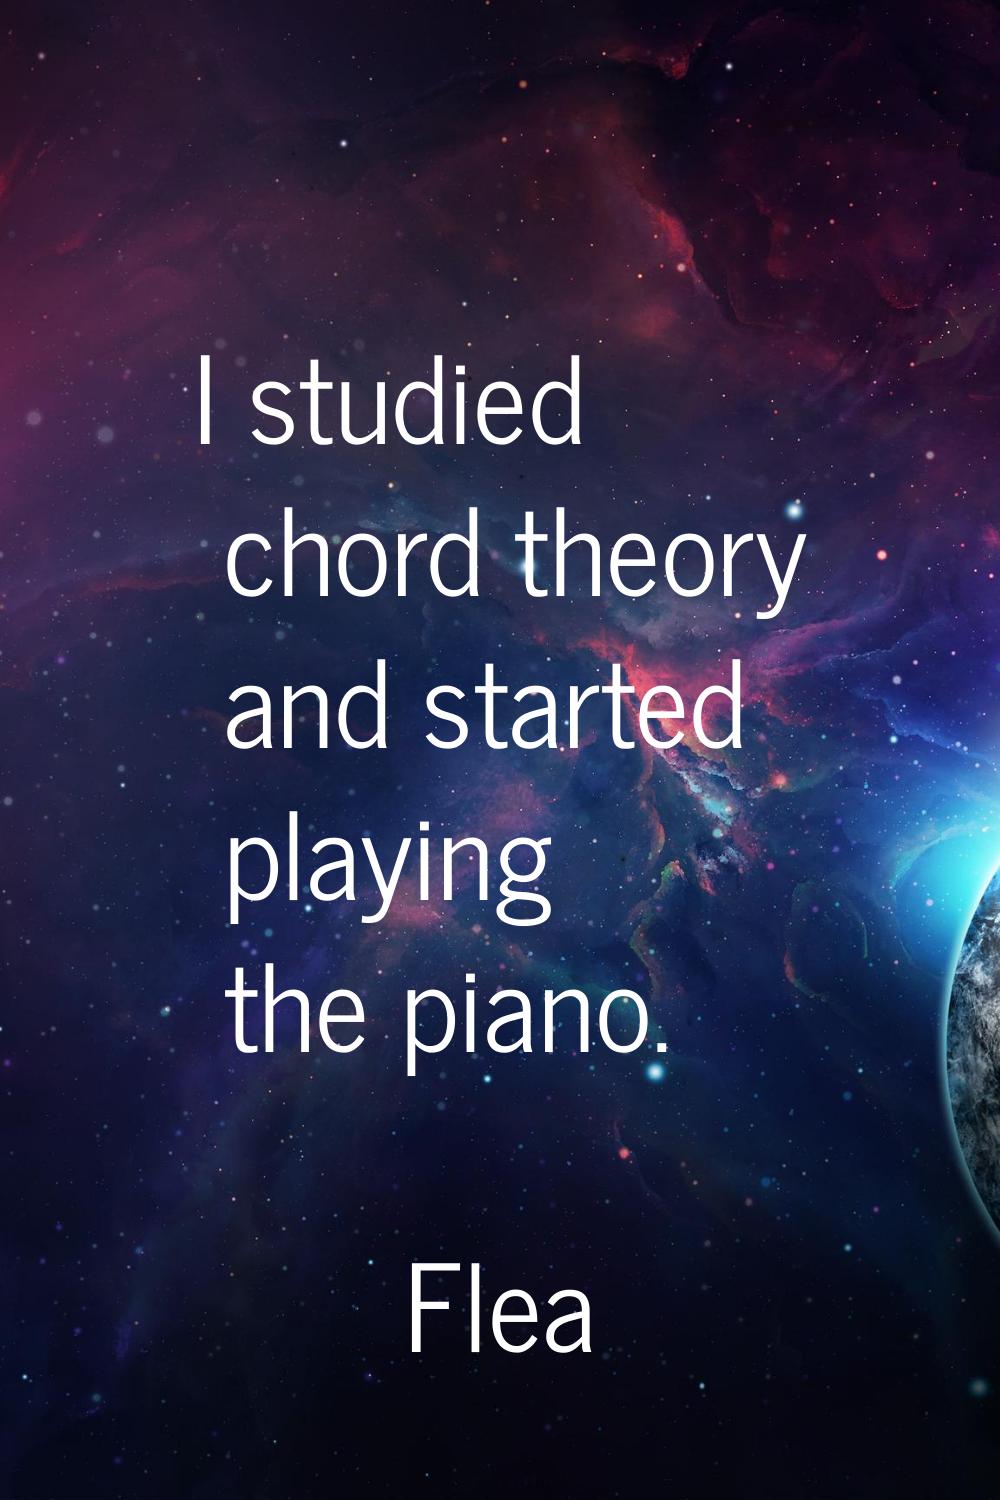 I studied chord theory and started playing the piano.